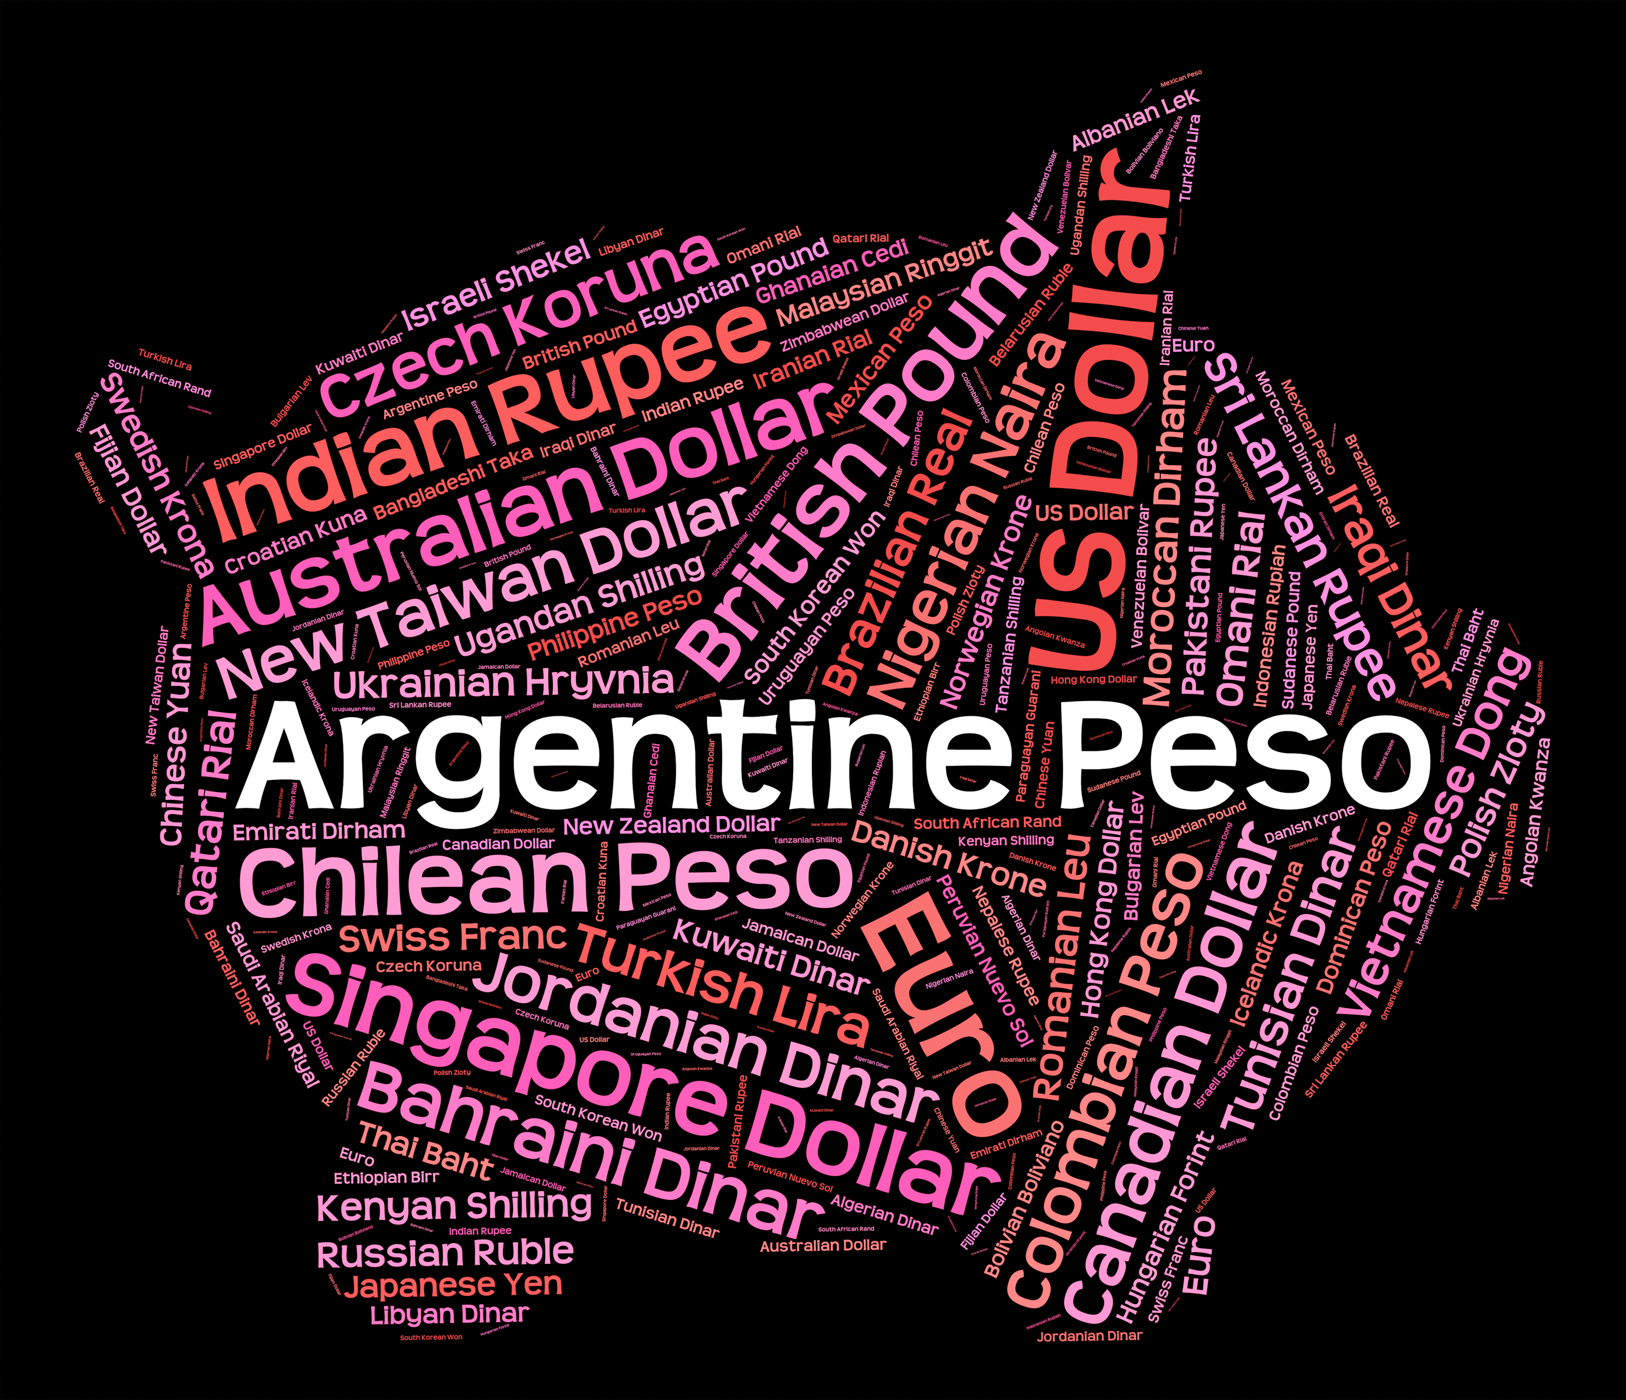 Argentine peso represents foreign exchange and argentina photo